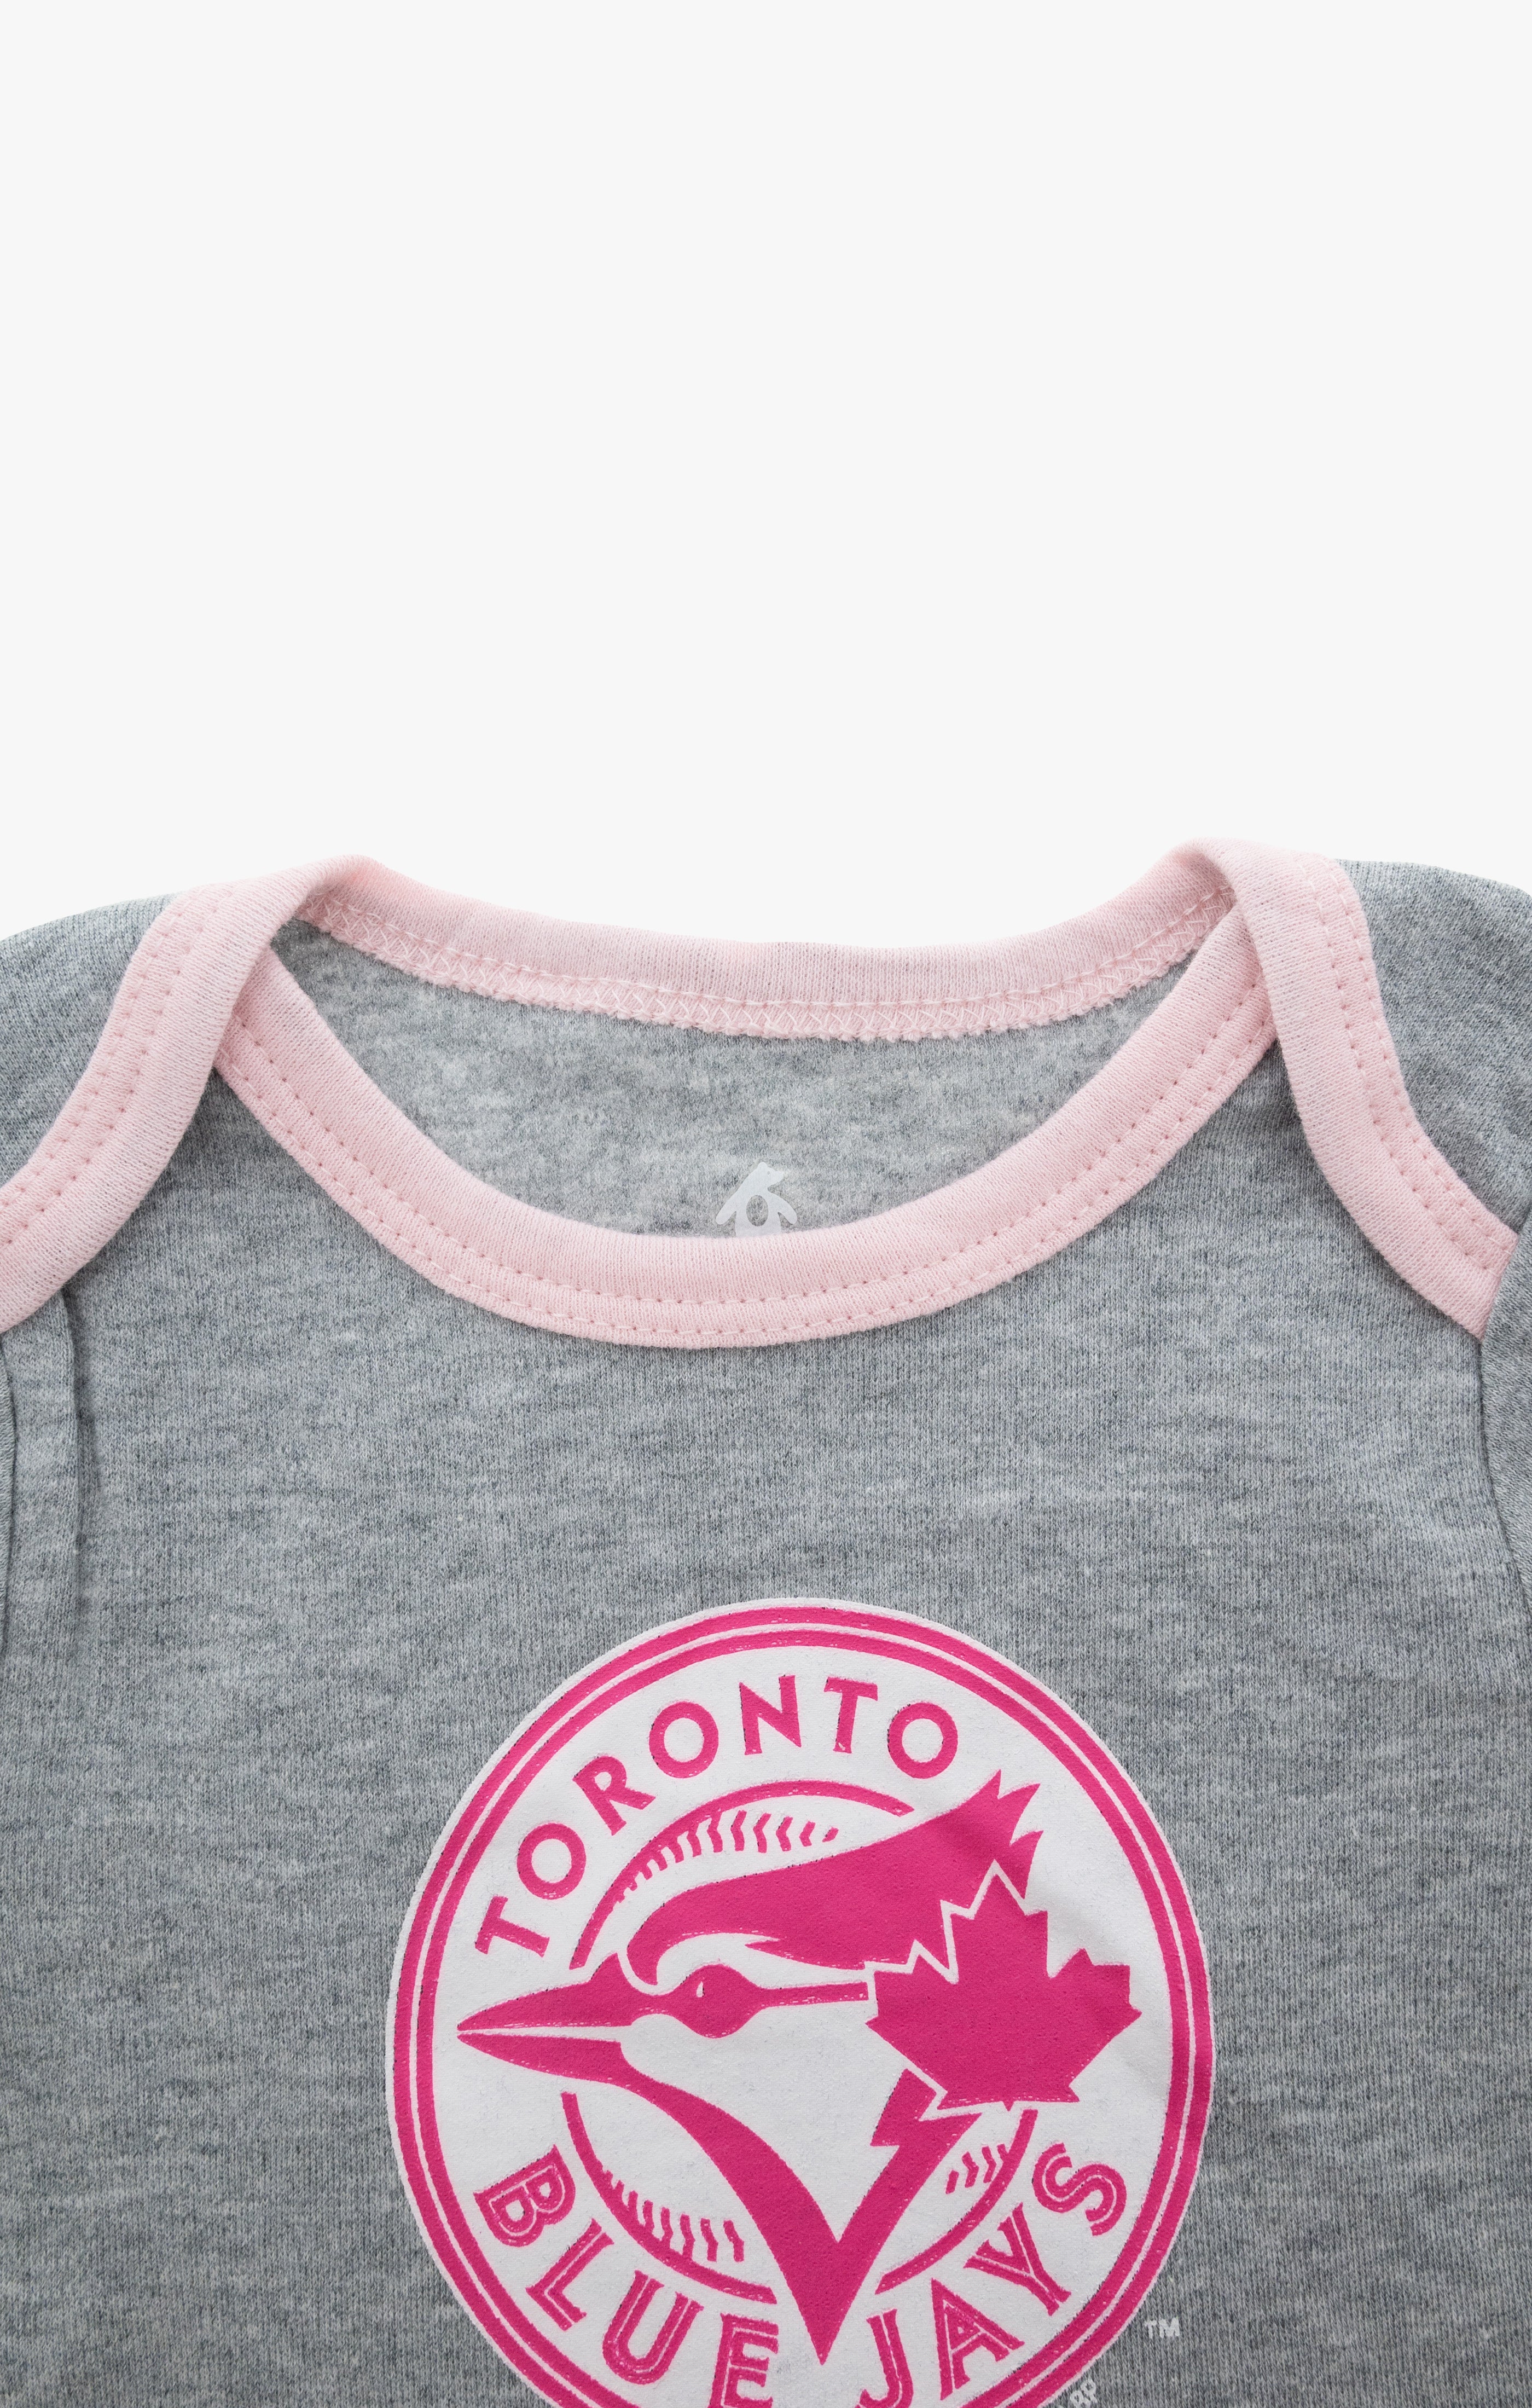 MLB Toronto Blue Jays 3 Pack Baby Onesie Body Suits in Pink